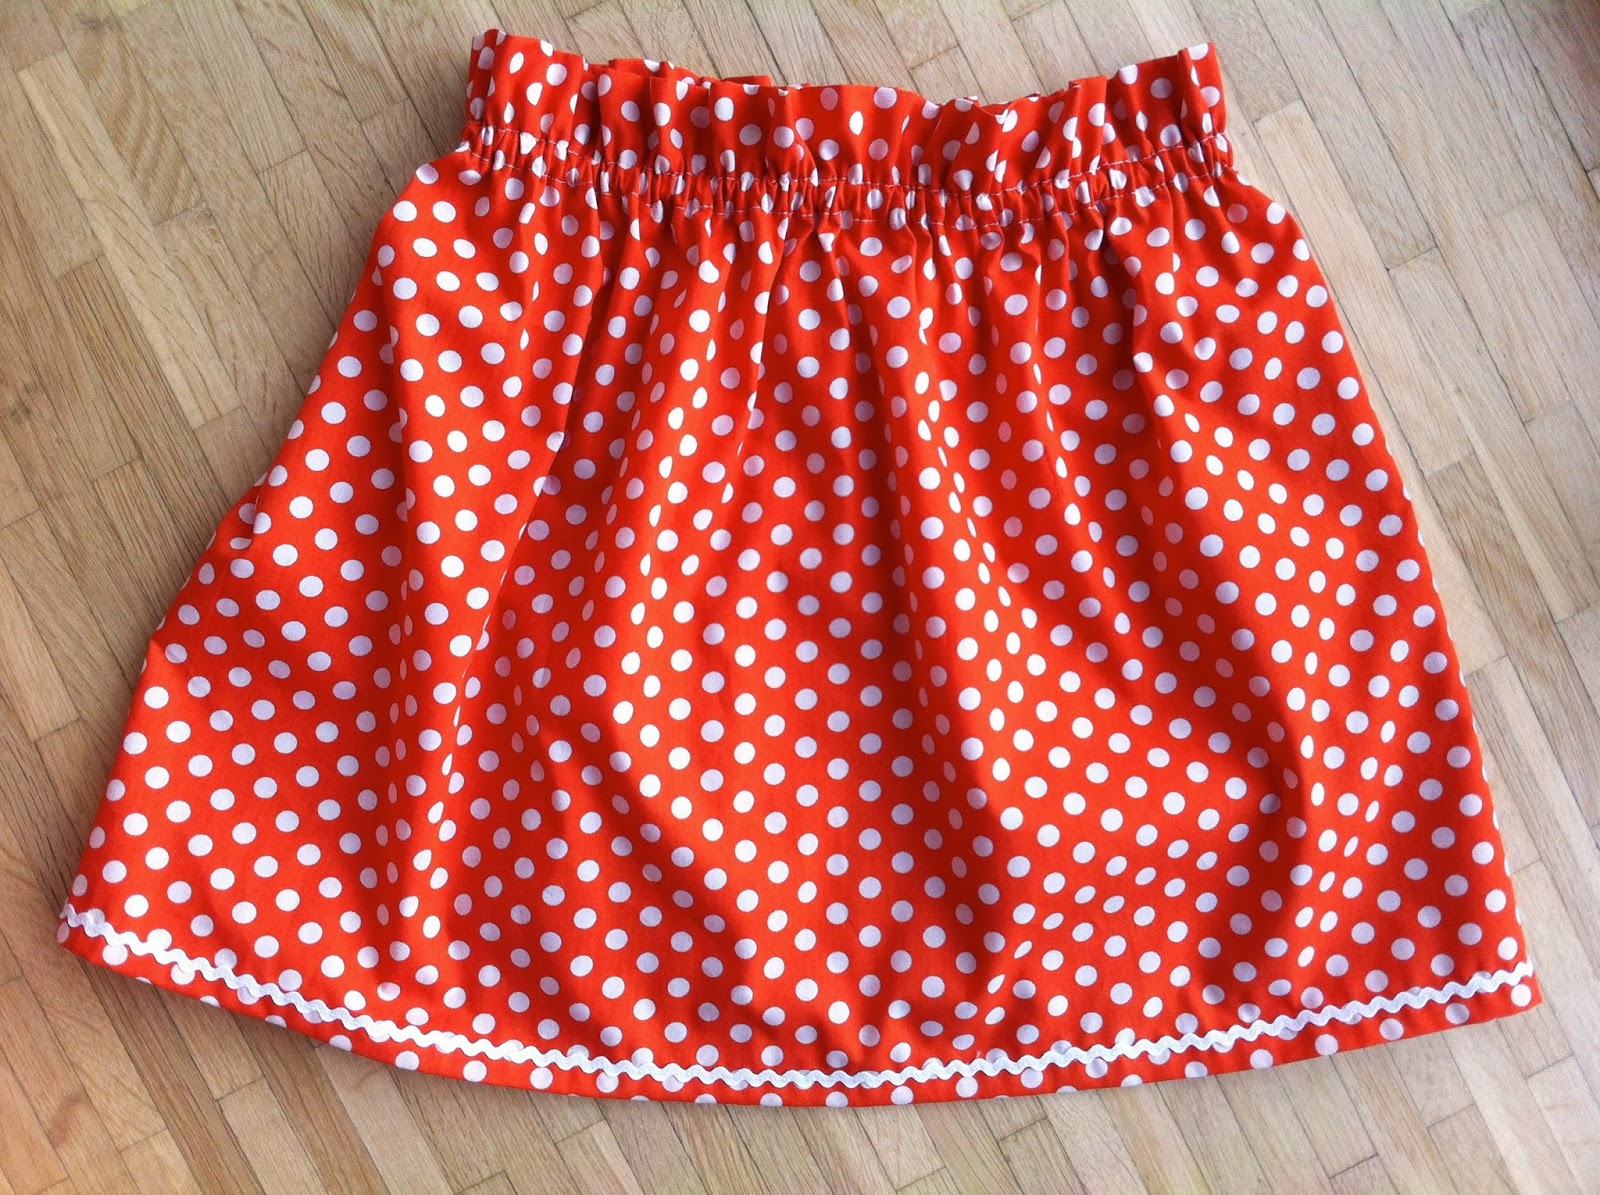 Acorn Pies: Summer Skirts for Nieces!